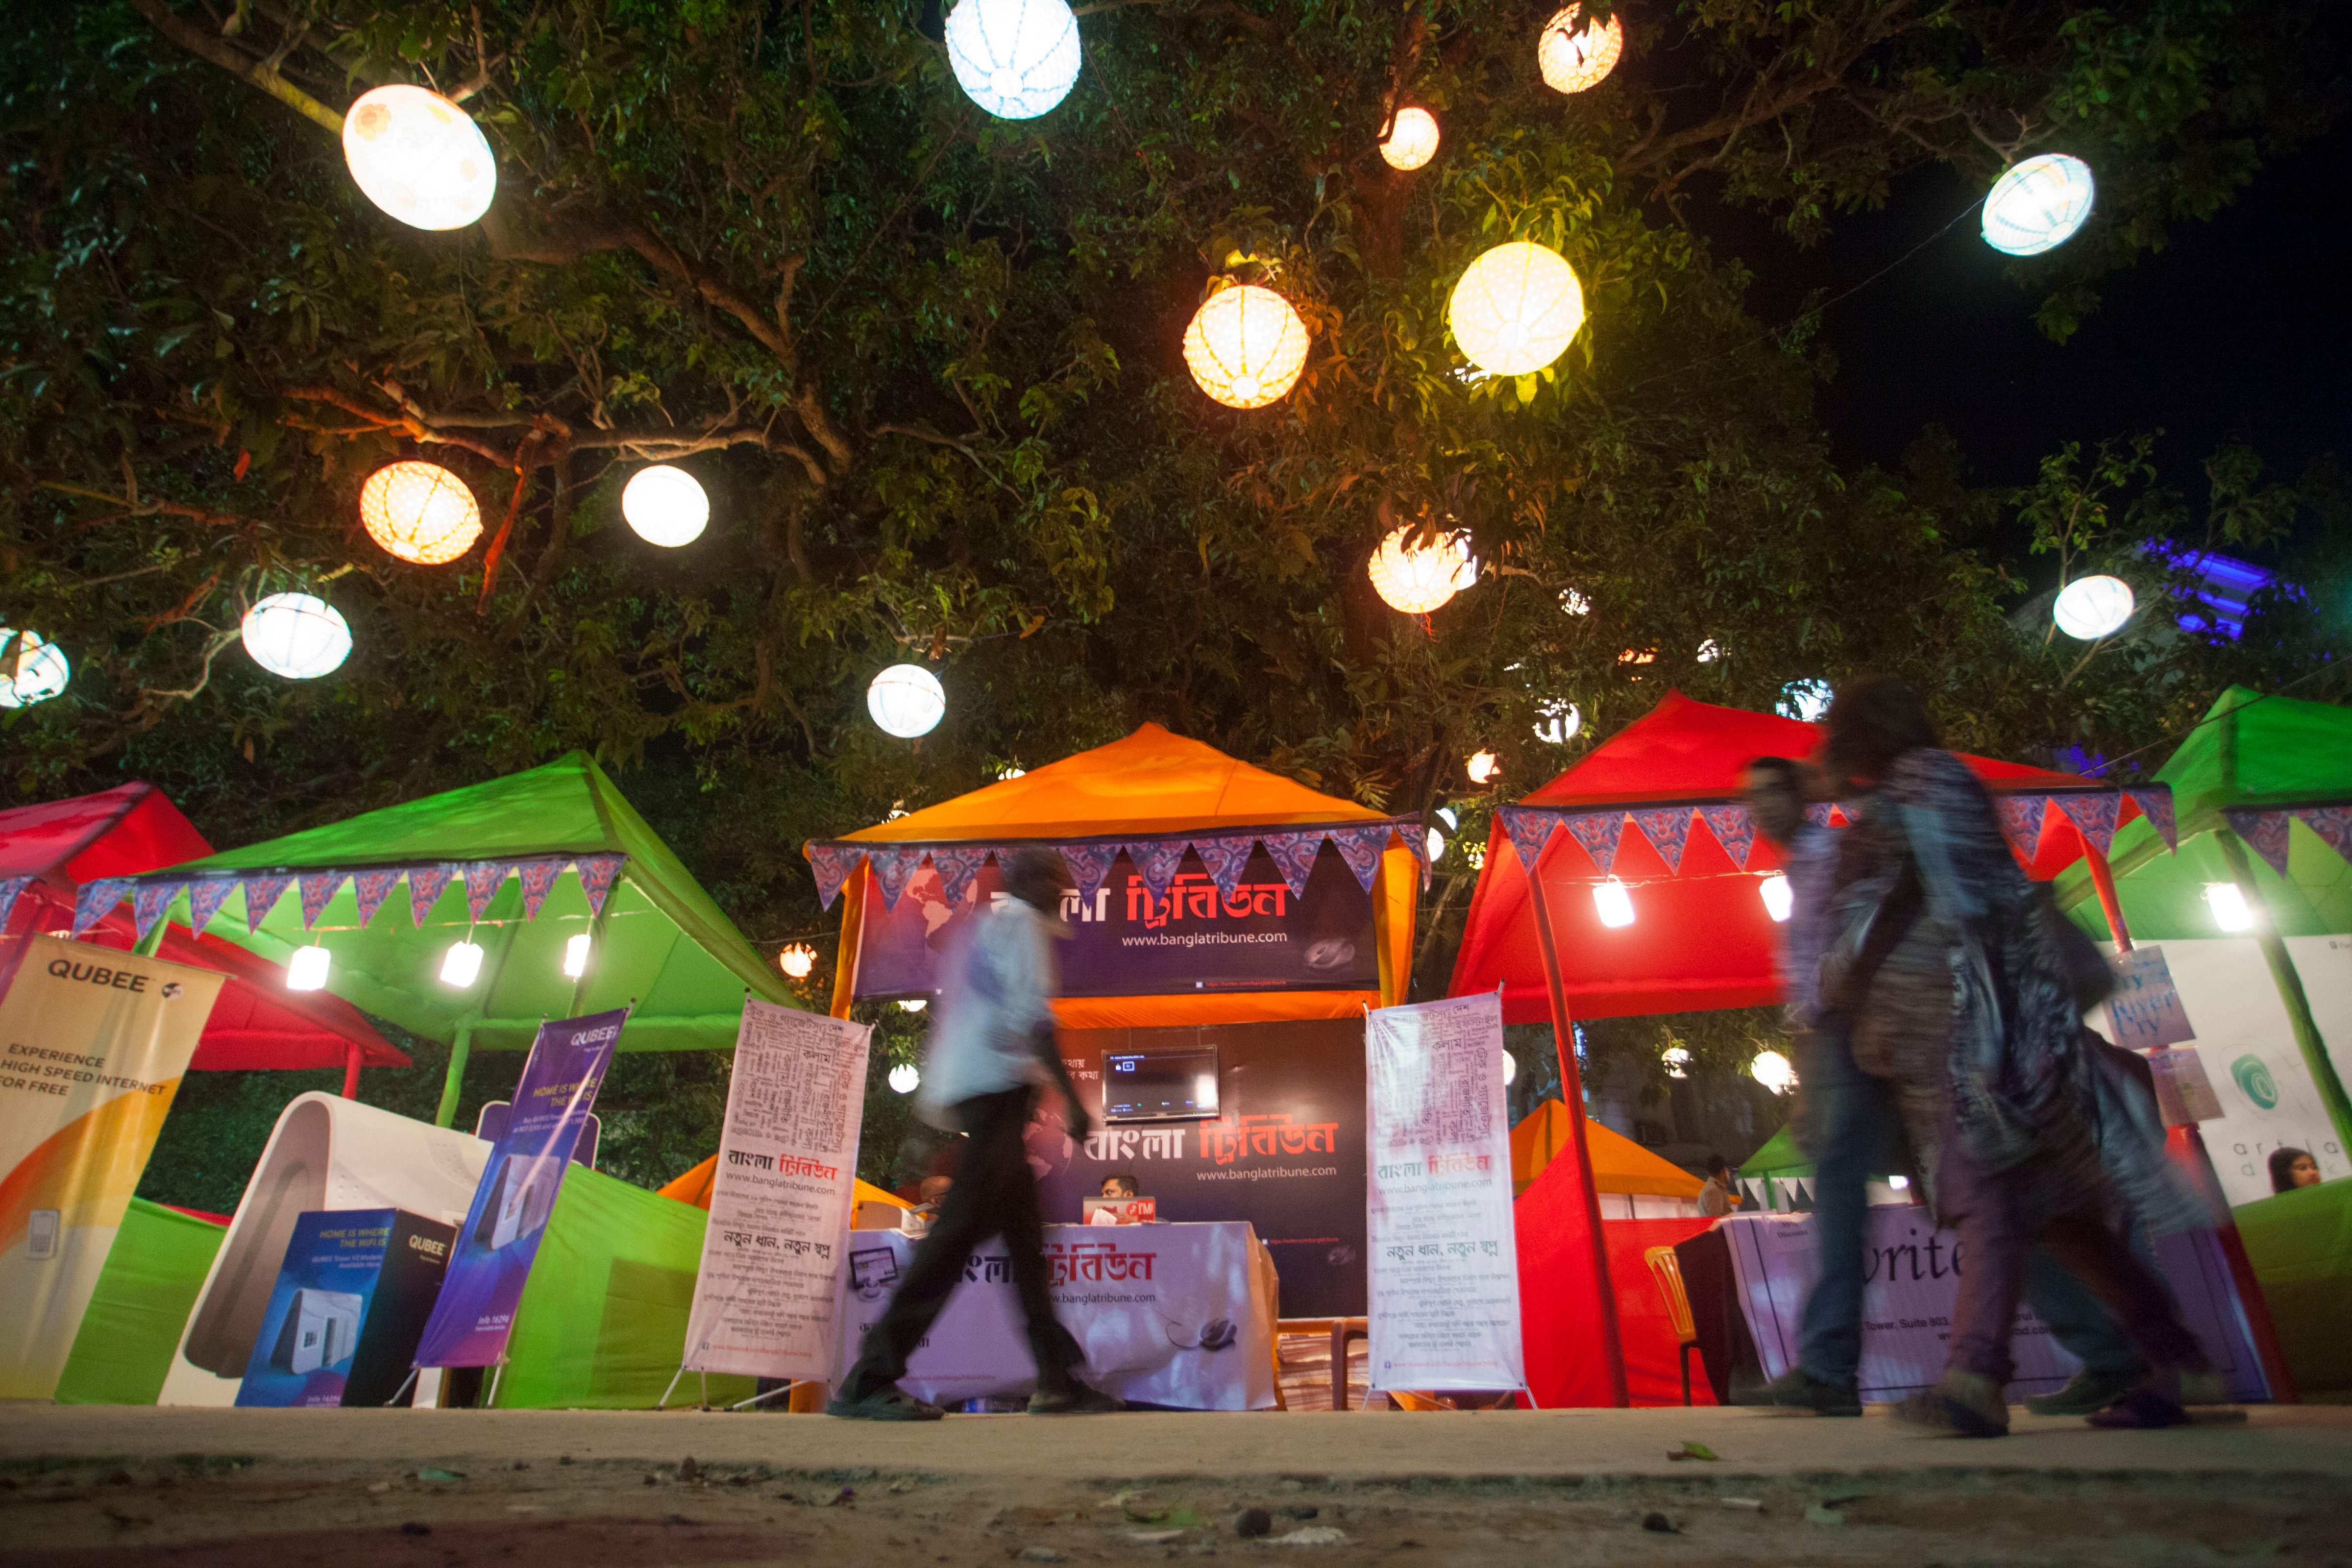 People attend the Dhaka Literary Festival, launched at the Bangla Academy of the Dhaka University campus on November 20, 2015 in Dhaka, Bangladesh. (Barcroft Media—Barcroft Media via Getty Images)